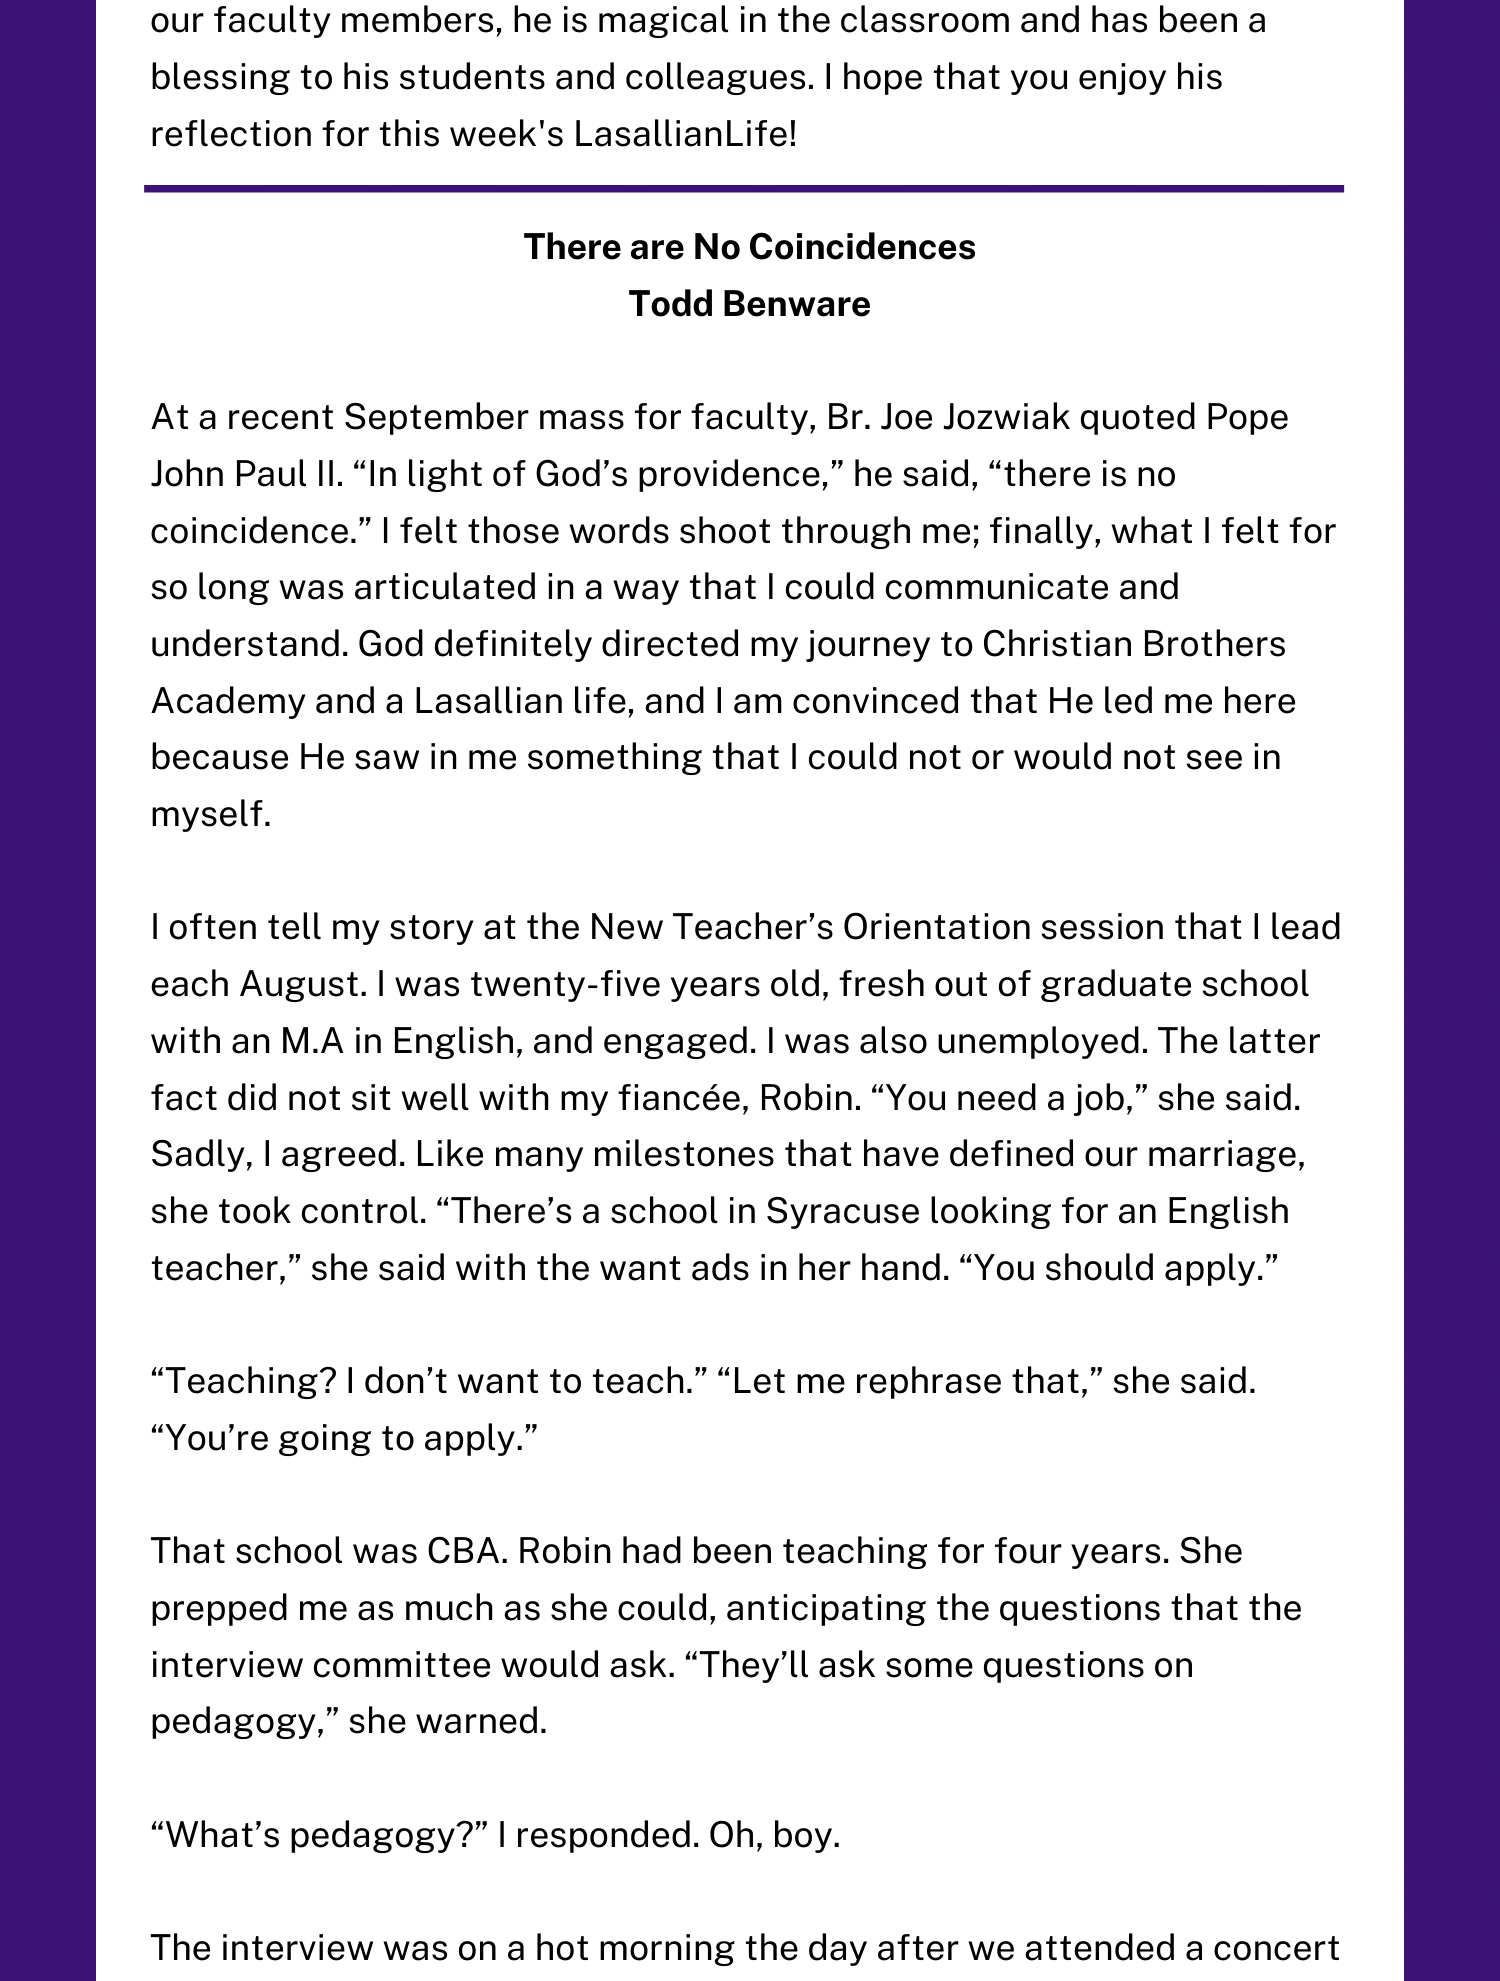 CBA Syracuse, NY teacher, Todd Benware, shares his story entitled "There are No Coincidences"